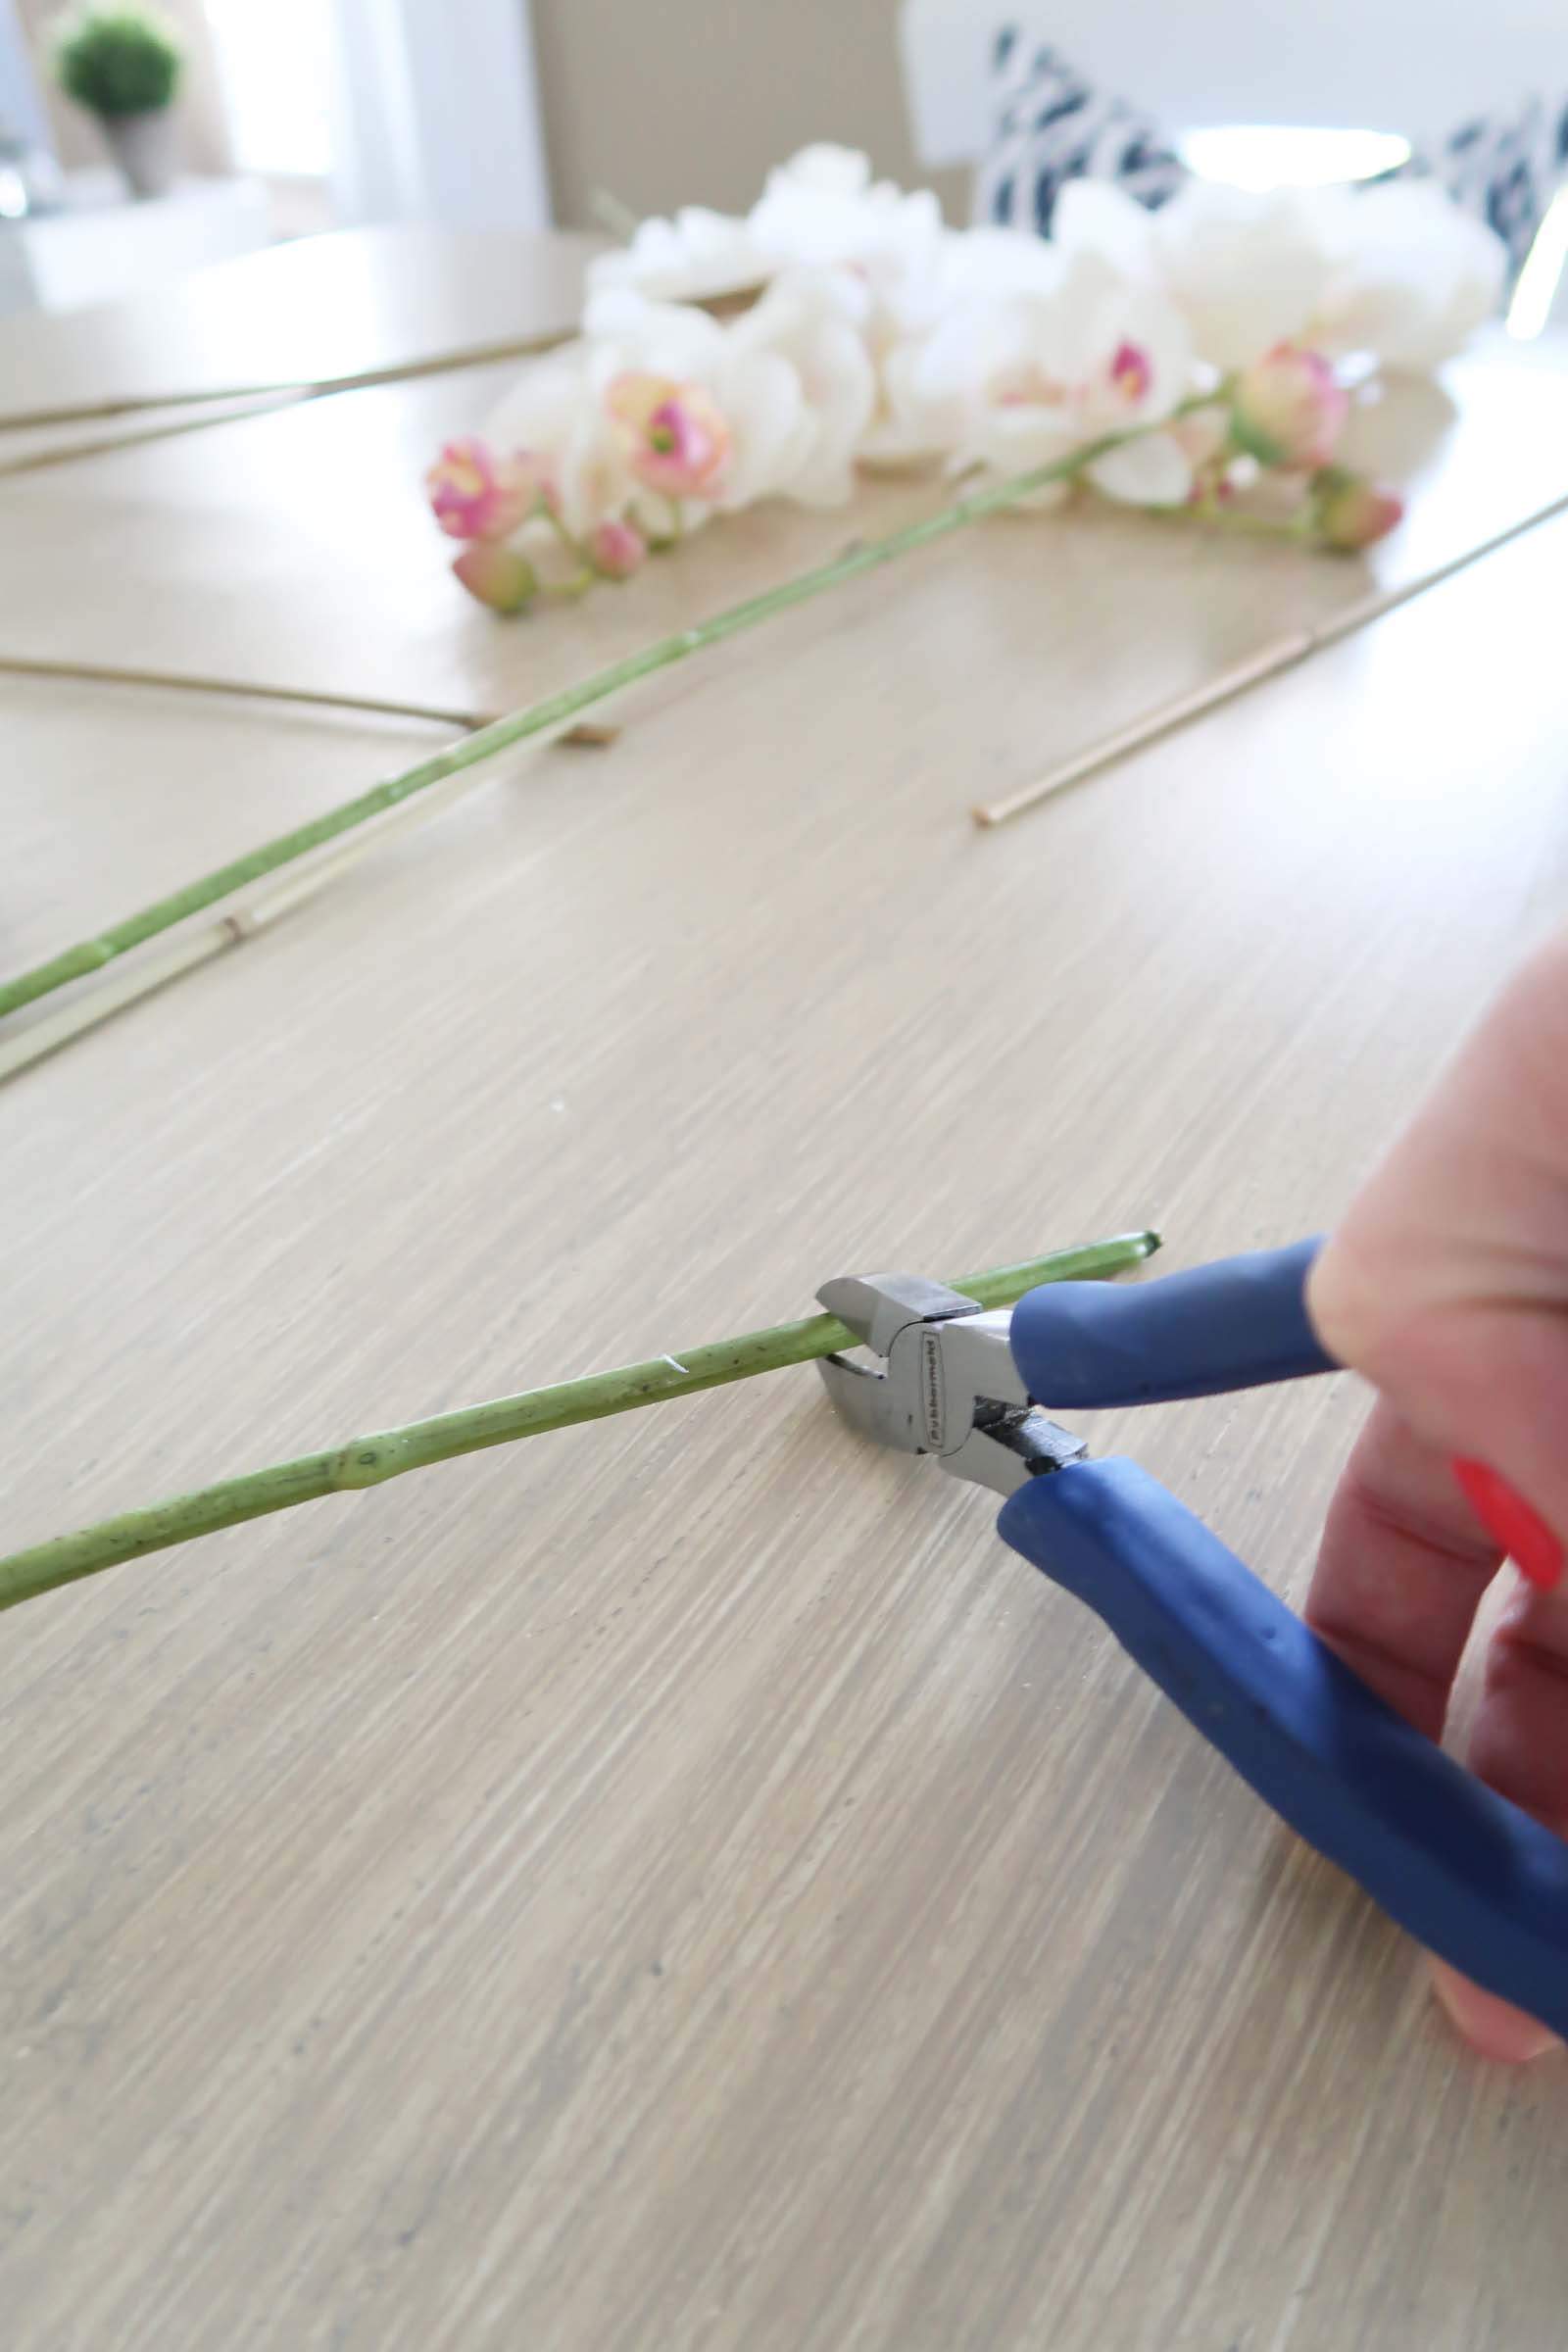 Trim Orchid stems an inch with wire cutters